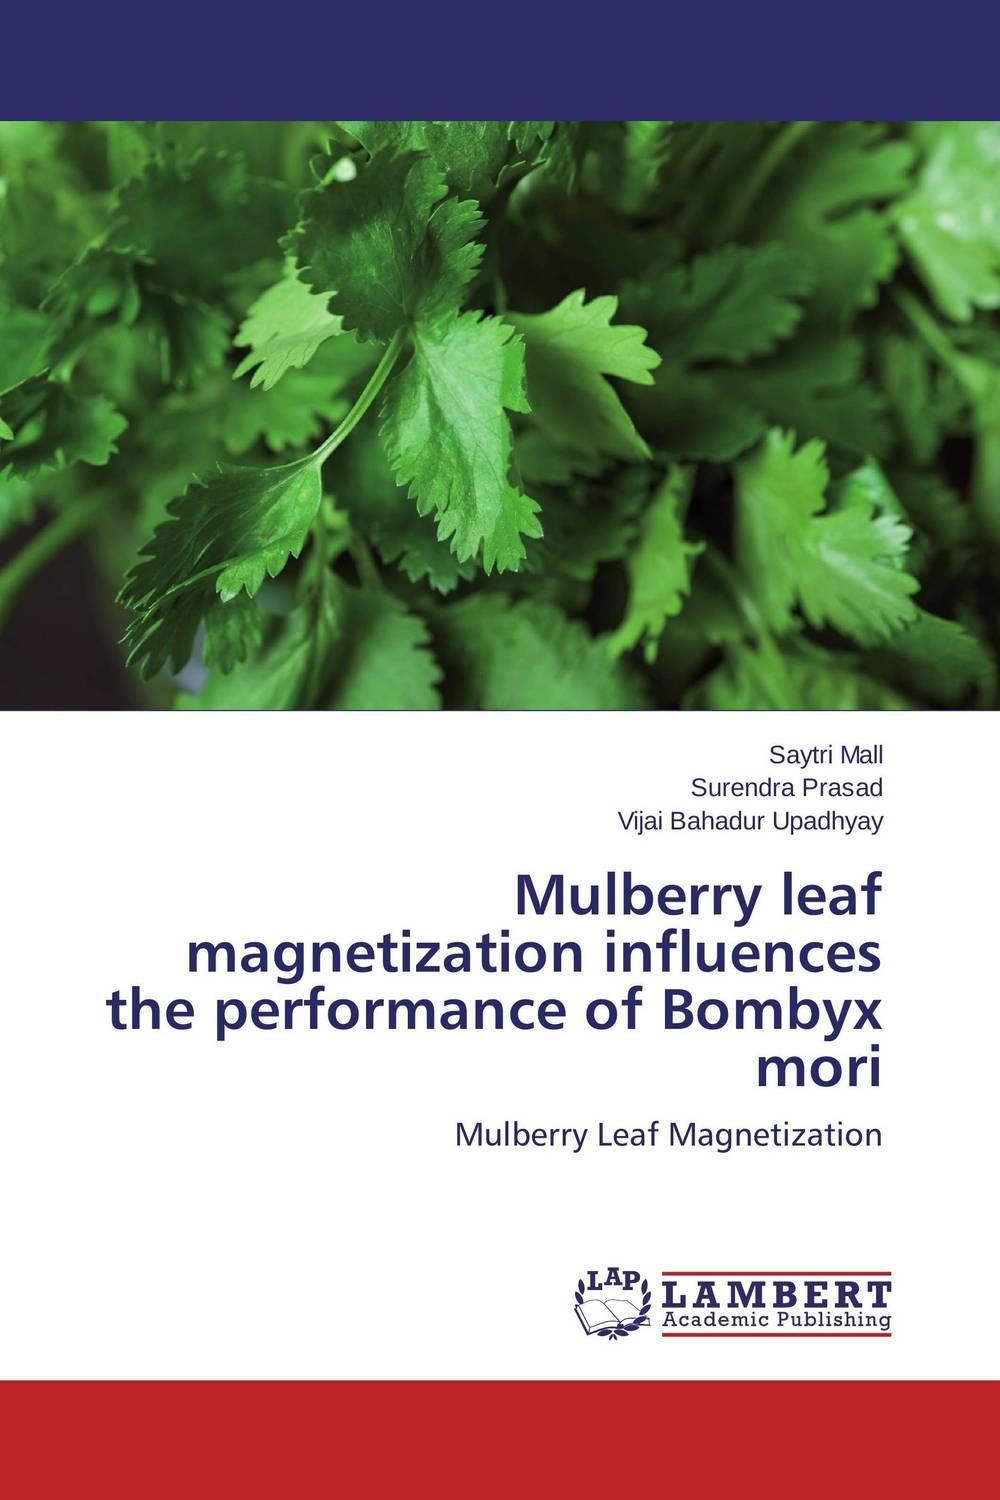 Mulberry leaf magnetization influences the performance of Bombyx mori